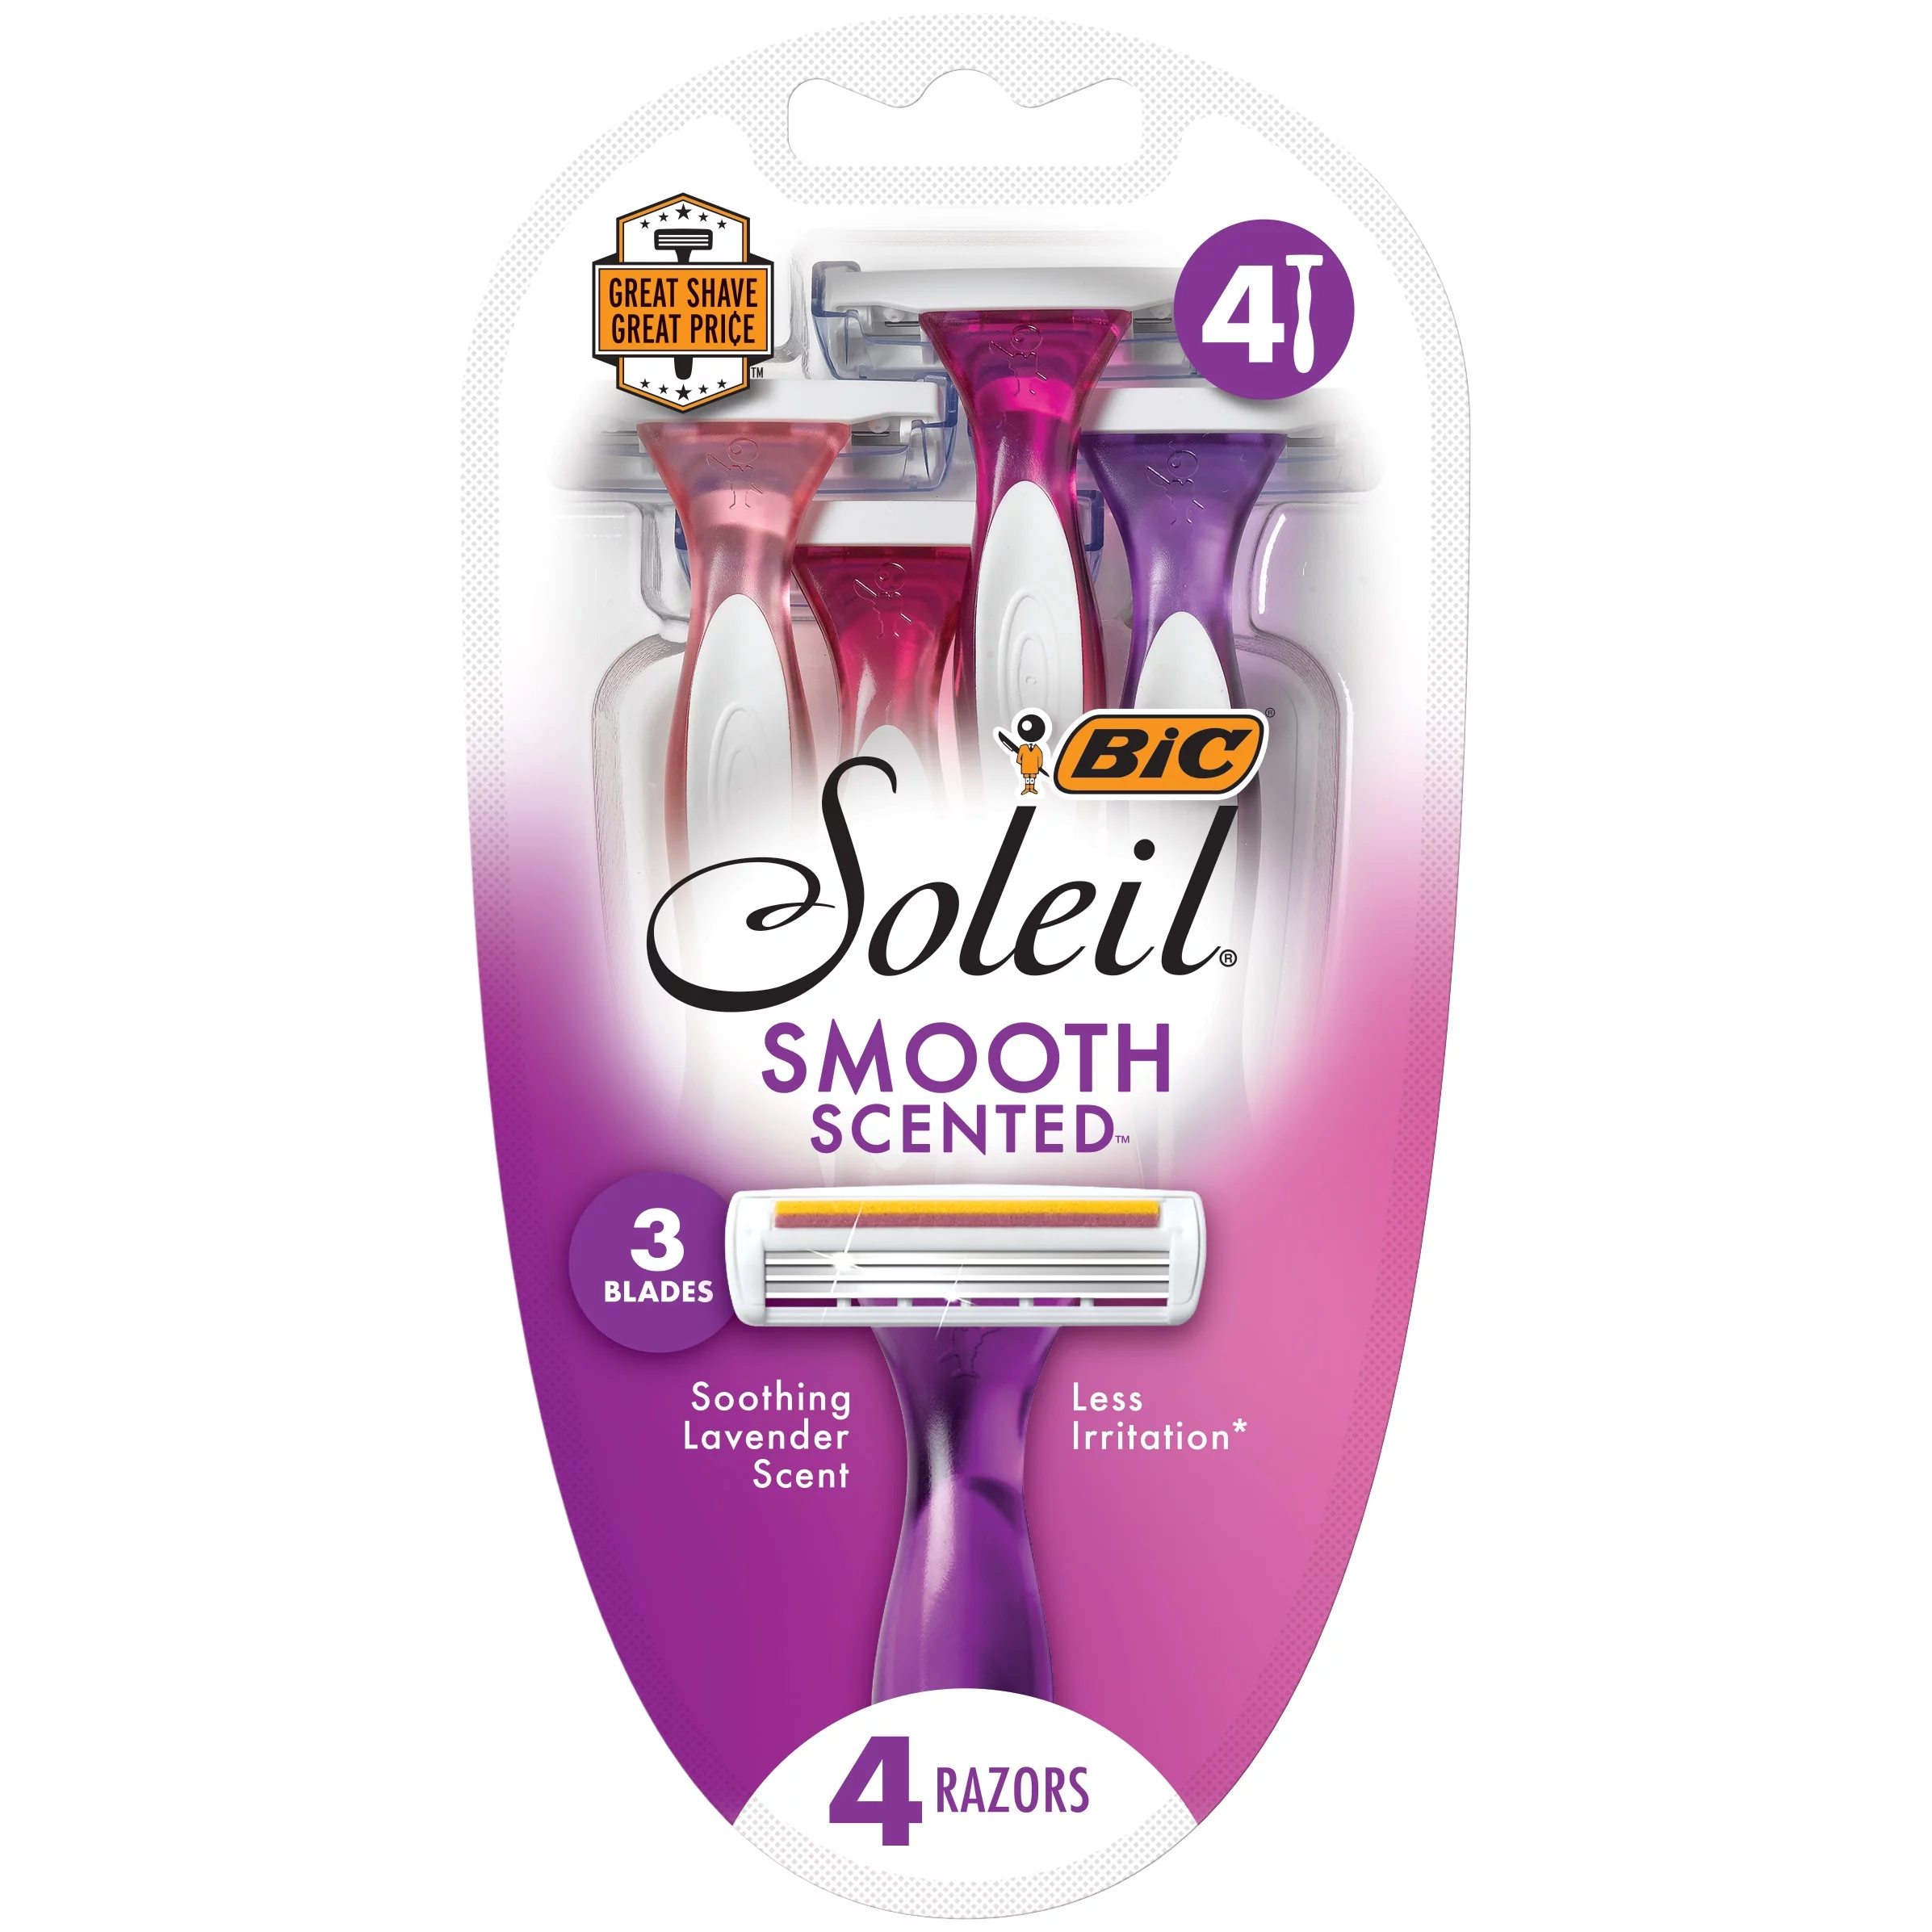 BIC Soleil Smooth Scented Women's Disposable Razor, 3 Blade, 4 Pack